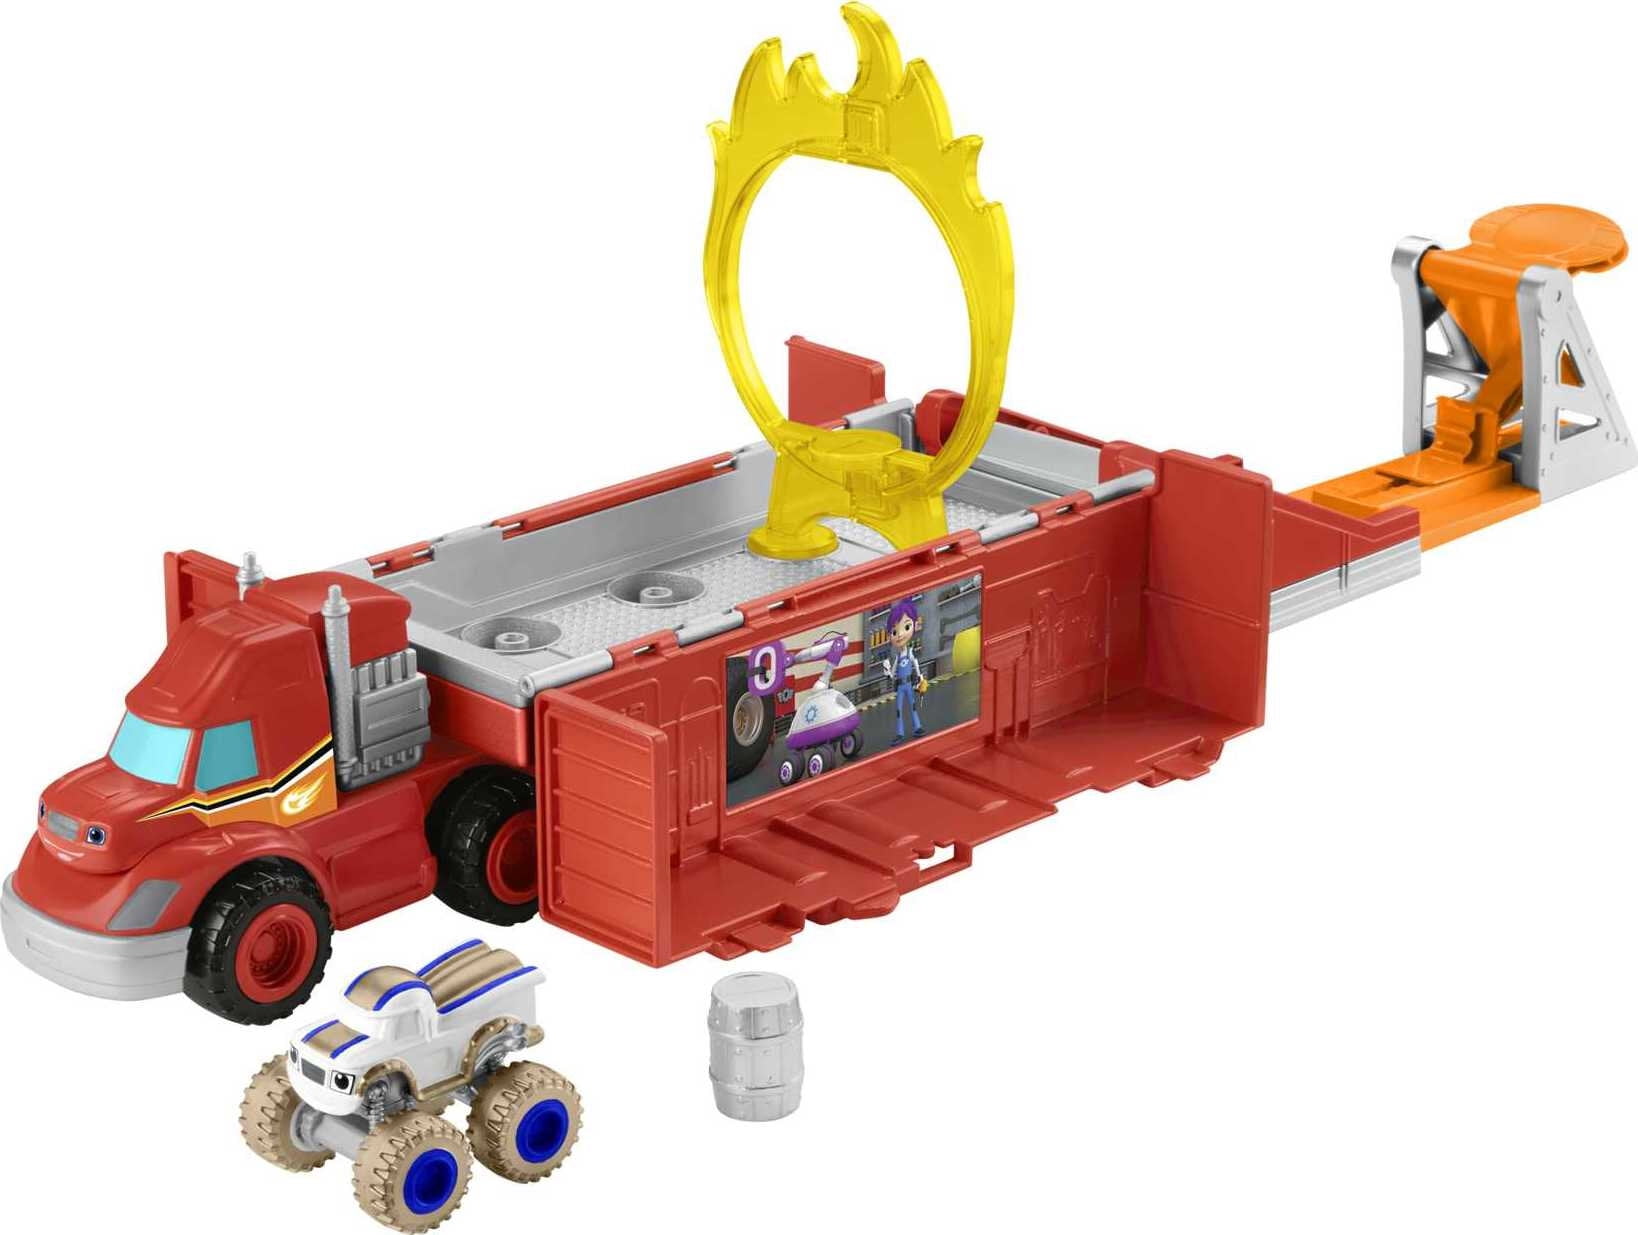 Fisher-Price Blaze and the Monster Machines Launch & Stunts Hauler, Transforming Vehicle Playset